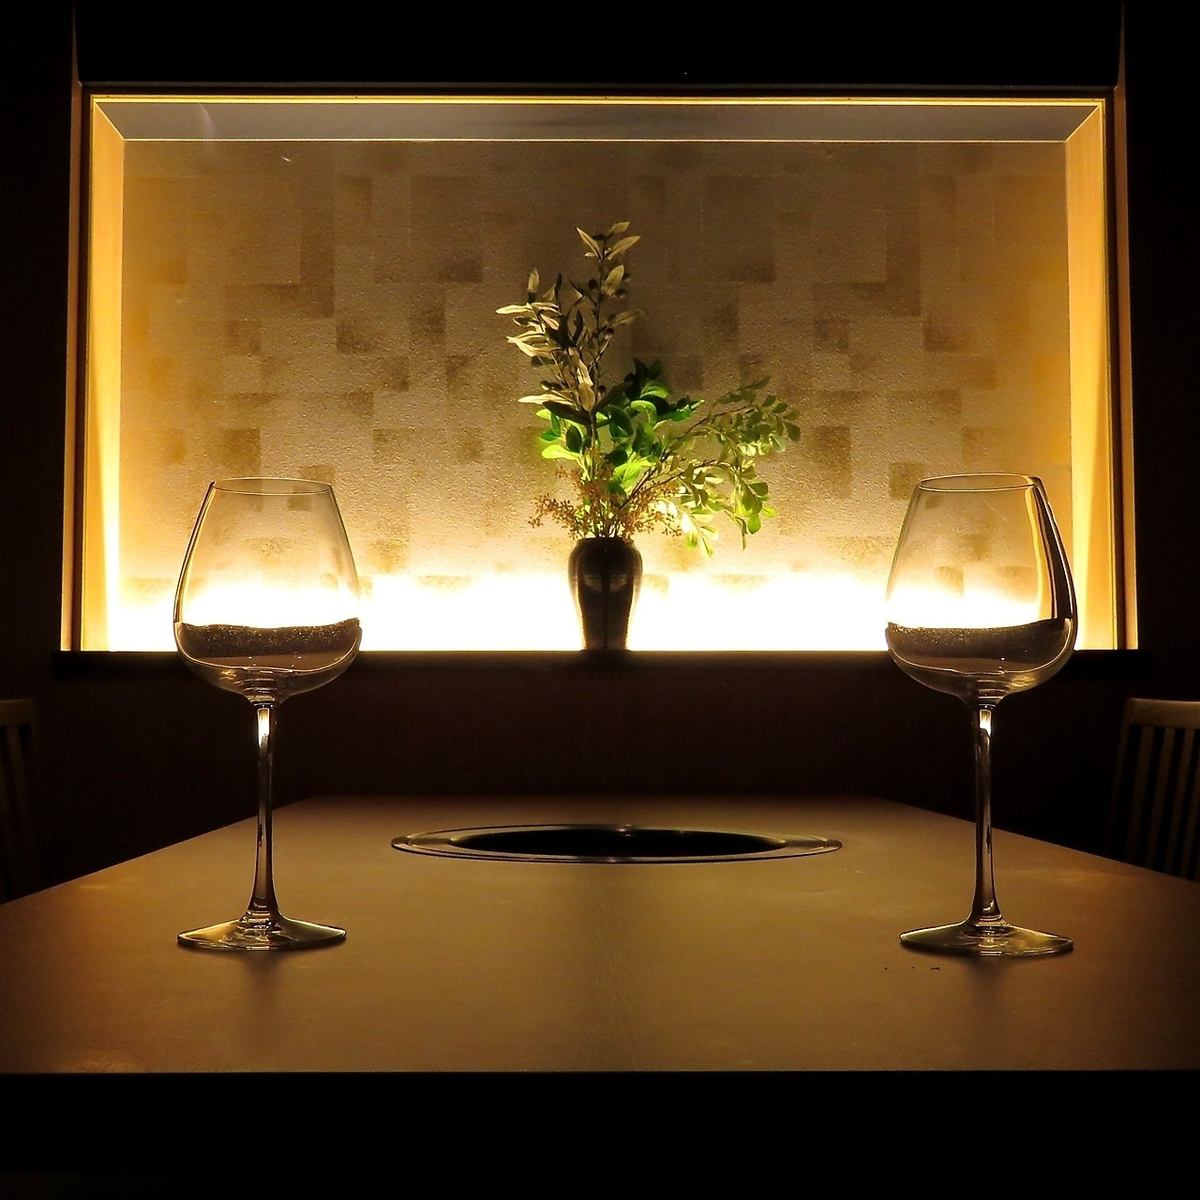 Grand opening on June 1 ★Kumamoto yakiniku and local cuisine can be savored luxuriously in private rooms★